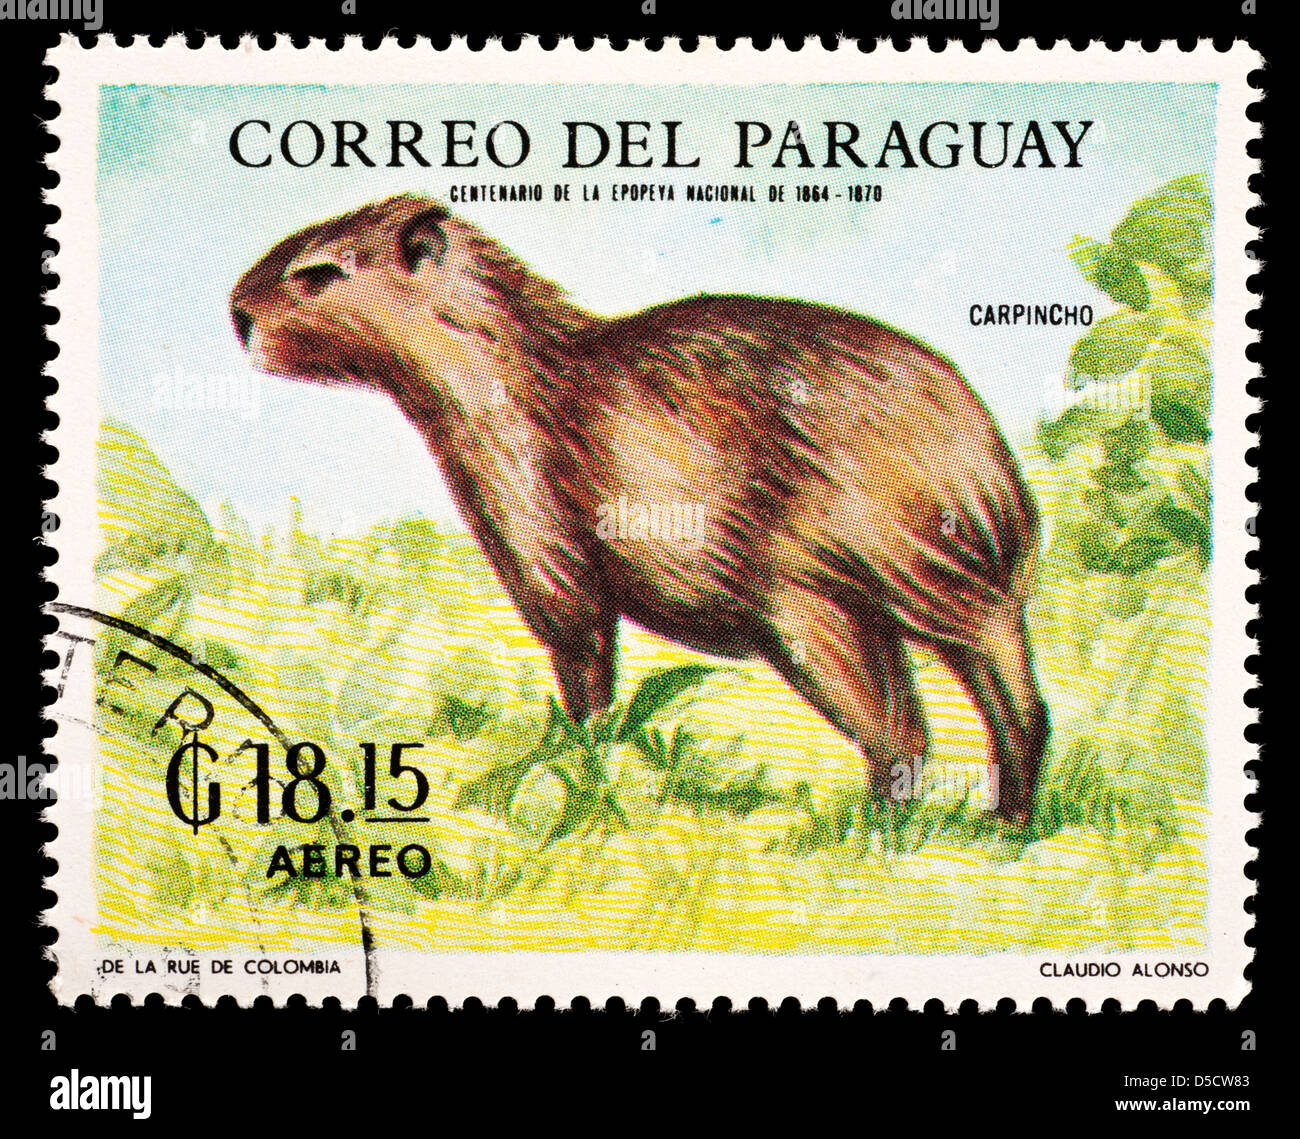 Postage stamp from Paraguay depicting a capybara (Hydrochoerus hydrochaeris) Stock Photo